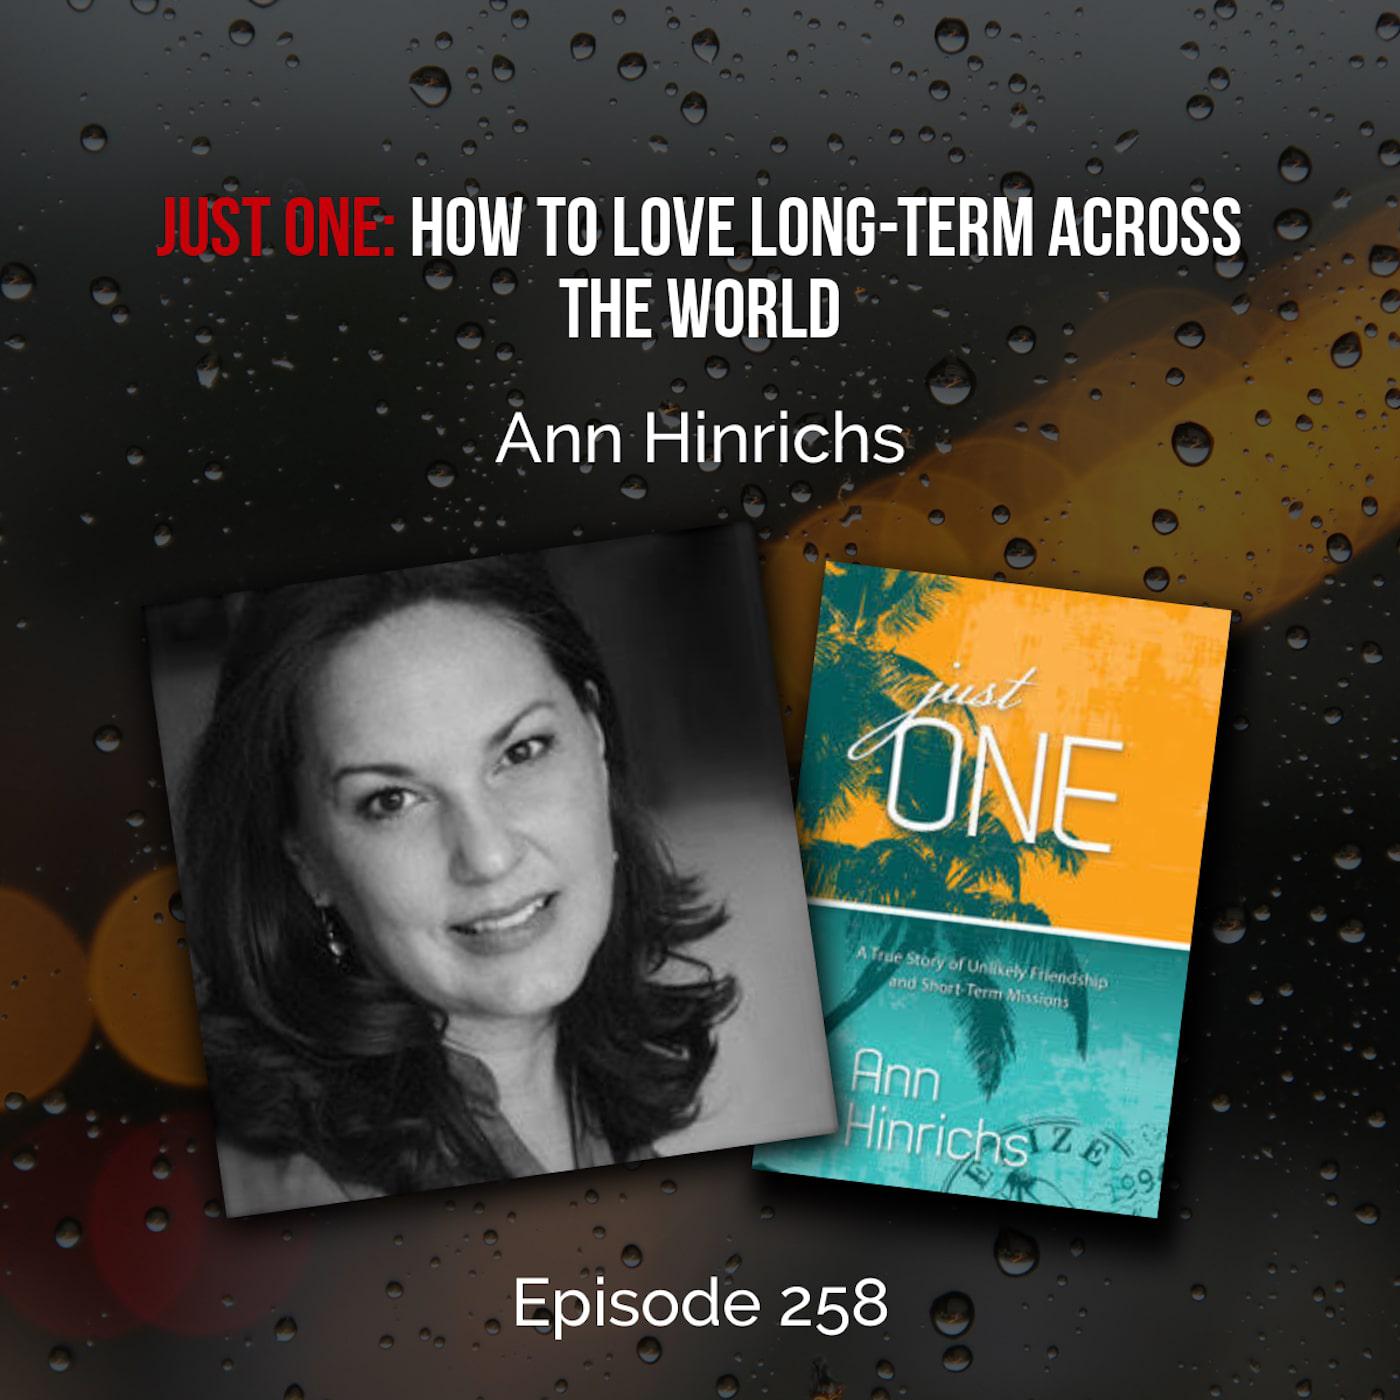 Just One: How to Love Long-Term Across the World, with Ann Hinrichs – EM258